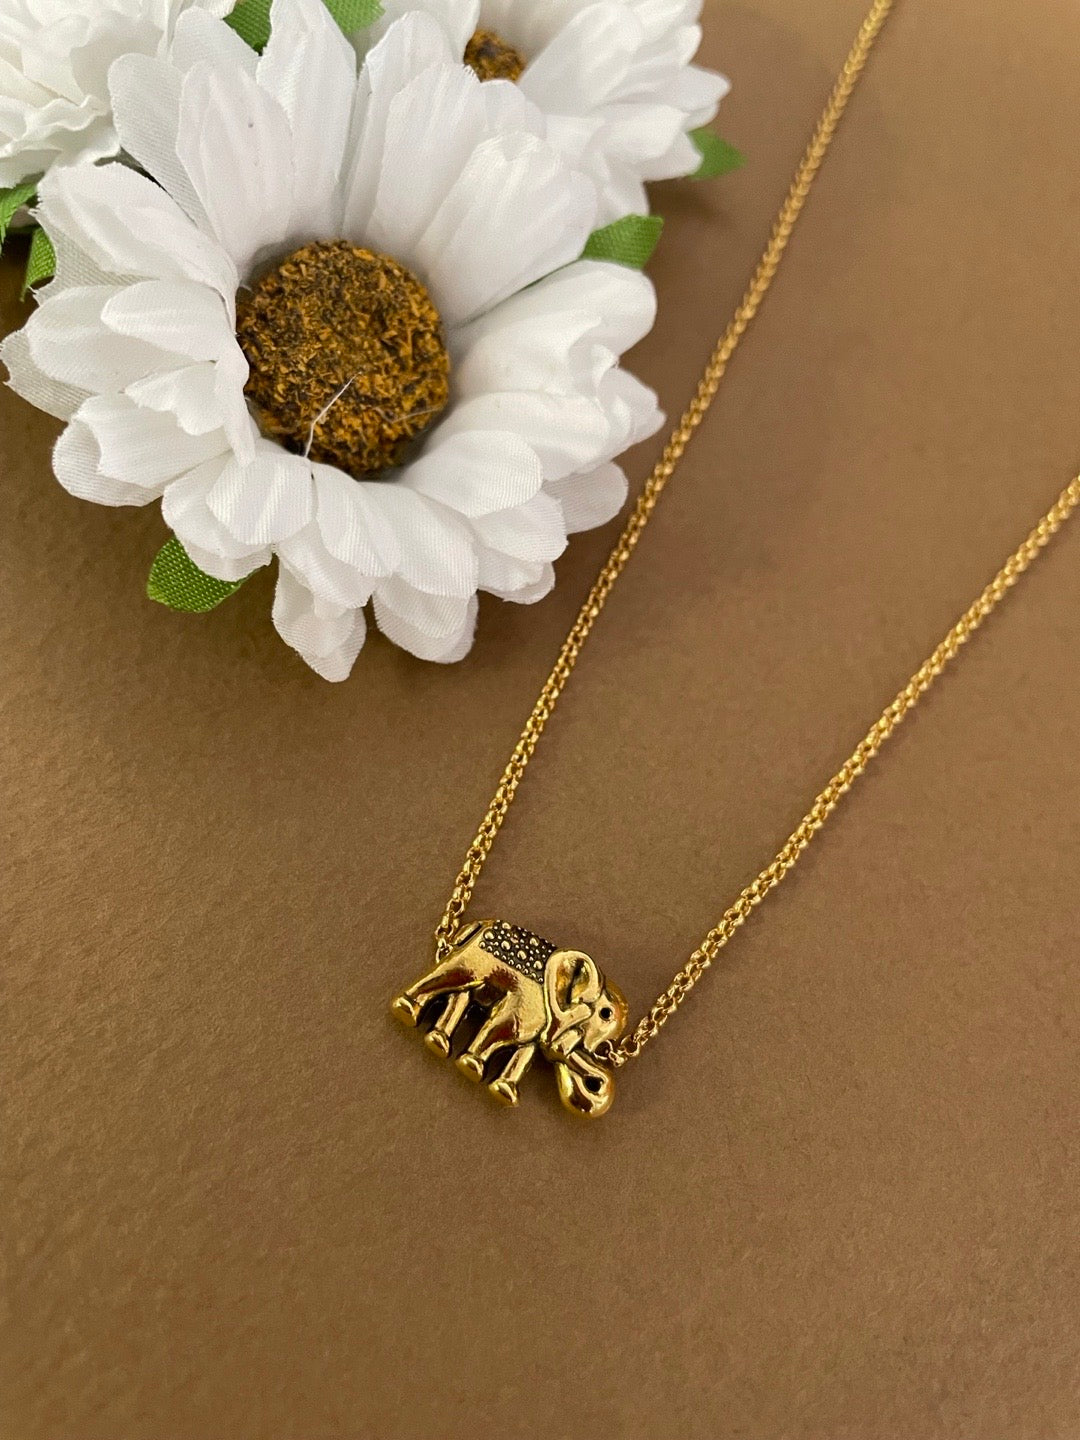 Zumrut� Gold Plated CZ Stud Stones Cute Small  Turtle/Tortoise/Kachua/Fengshu/Vaastu with Om/? Good Luck Charm Chain Pendant  Necklace Religious Spiritual Religious Pendant Jewellery for Men/Women :  Amazon.in: Fashion